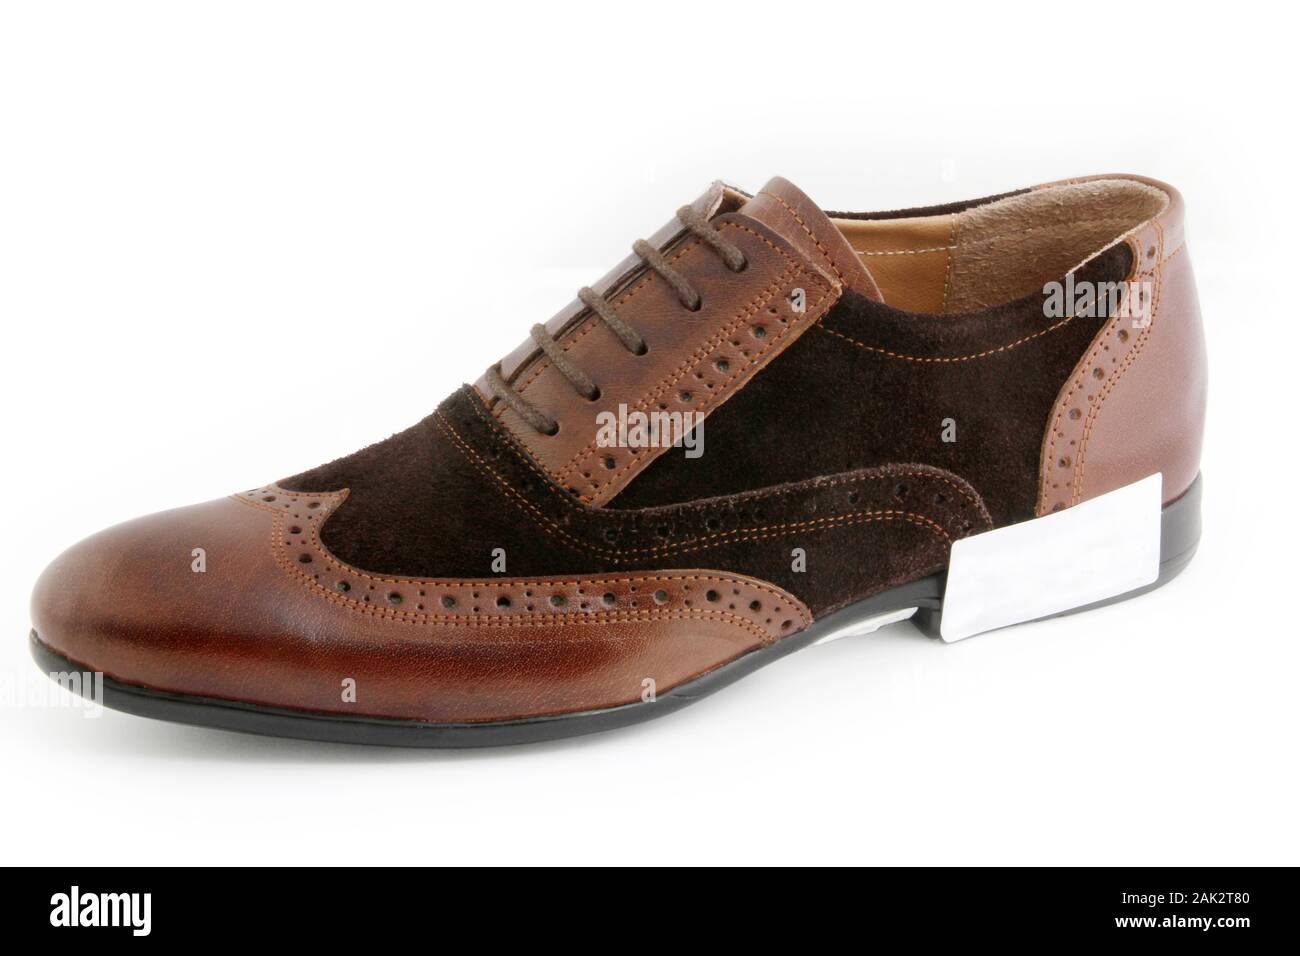 leather men's shoes Stock Photo - Alamy